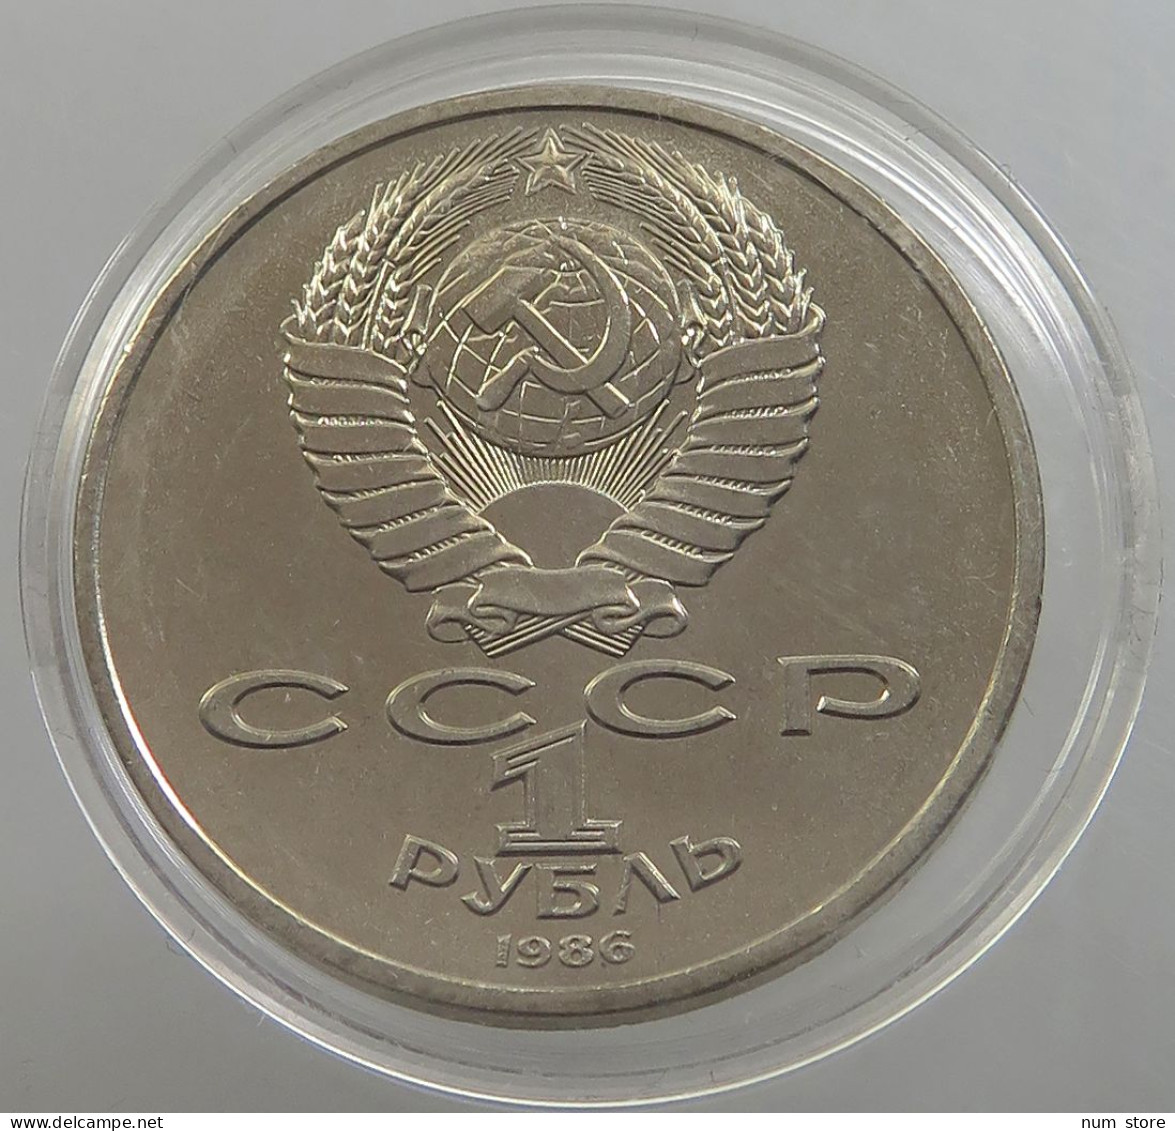 RUSSIA USSR 1 ROUBLE 1986 #sm14 0629 - Rusland